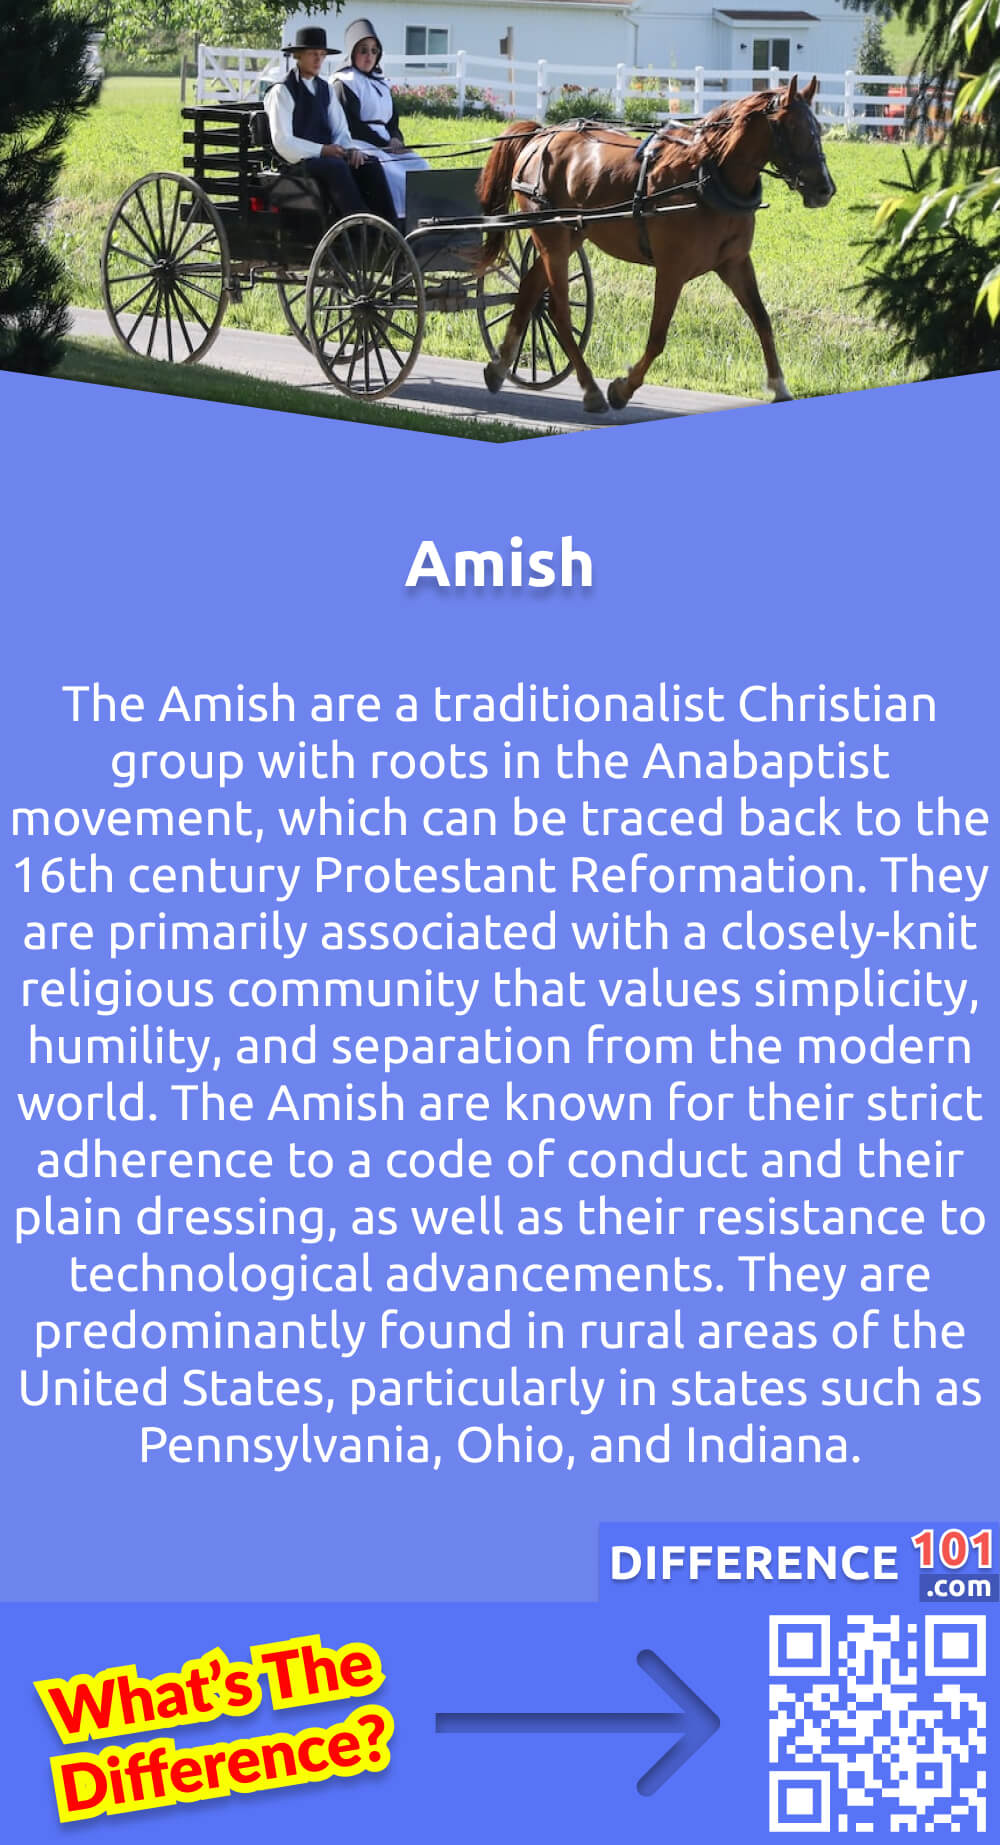 What Is Amish? The Amish are a traditionalist Christian group with roots in the Anabaptist movement, which can be traced back to the 16th century Protestant Reformation. They are primarily associated with a closely-knit religious community that values simplicity, humility, and separation from the modern world. The Amish are known for their strict adherence to a code of conduct and their plain dressing, as well as their resistance to technological advancements. They are predominantly found in rural areas of the United States, particularly in states such as Pennsylvania, Ohio, and Indiana. The hallmark of Amish life is their commitment to agrarian-based living and their aversion to many aspects of modern society, such as electricity, cars, and telephones.